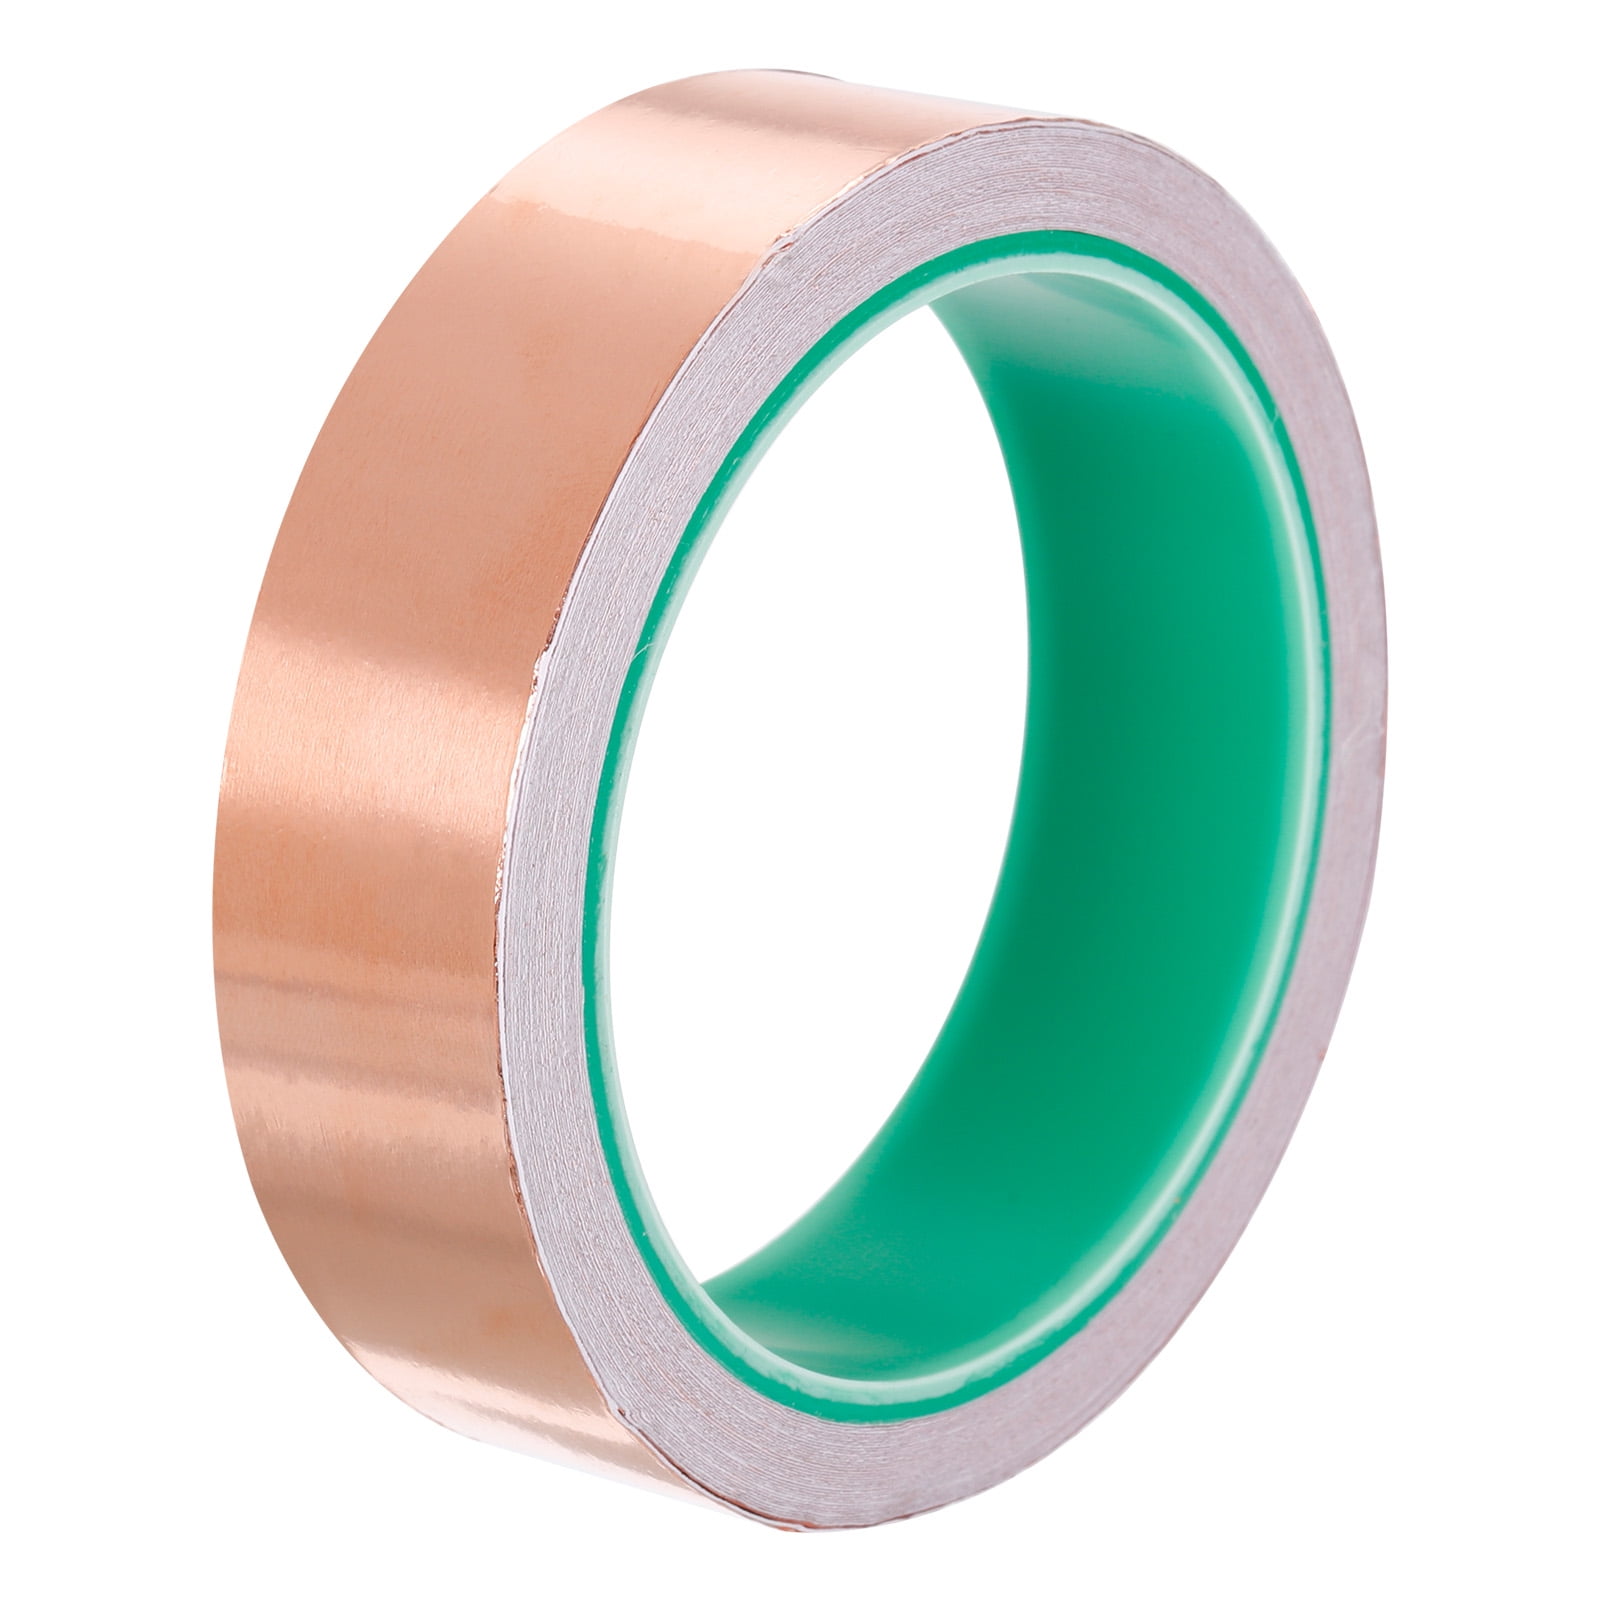 Uxcell Double-Sided Conductive Tape Copper Foil Tape 6mm x 20m/65.6ft 1 pack